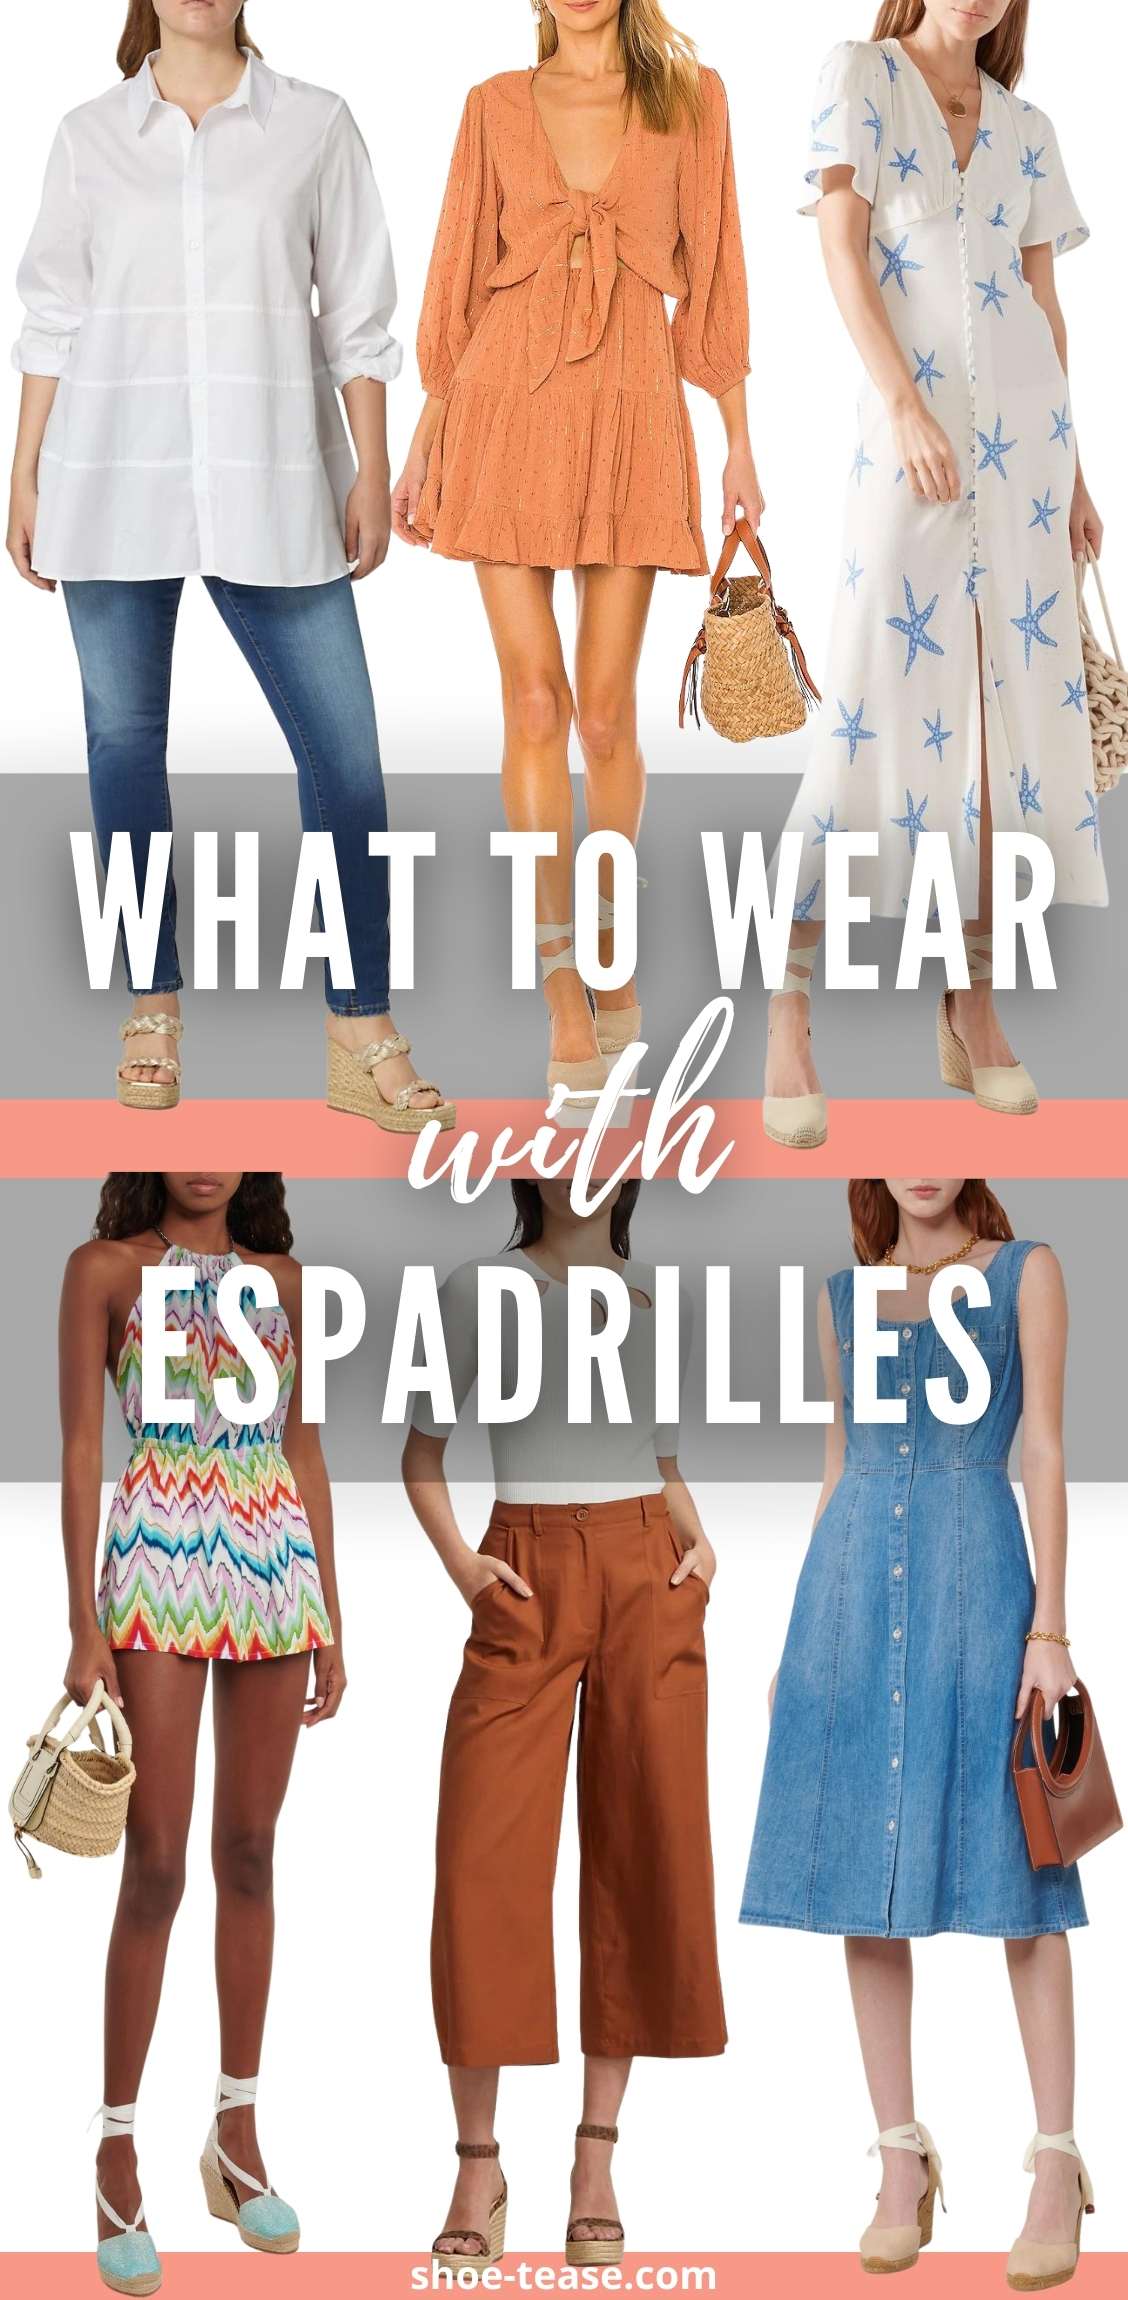 Words reading what to wear with espadrilles over collage of 6 women wearing different espadrilles outfits.